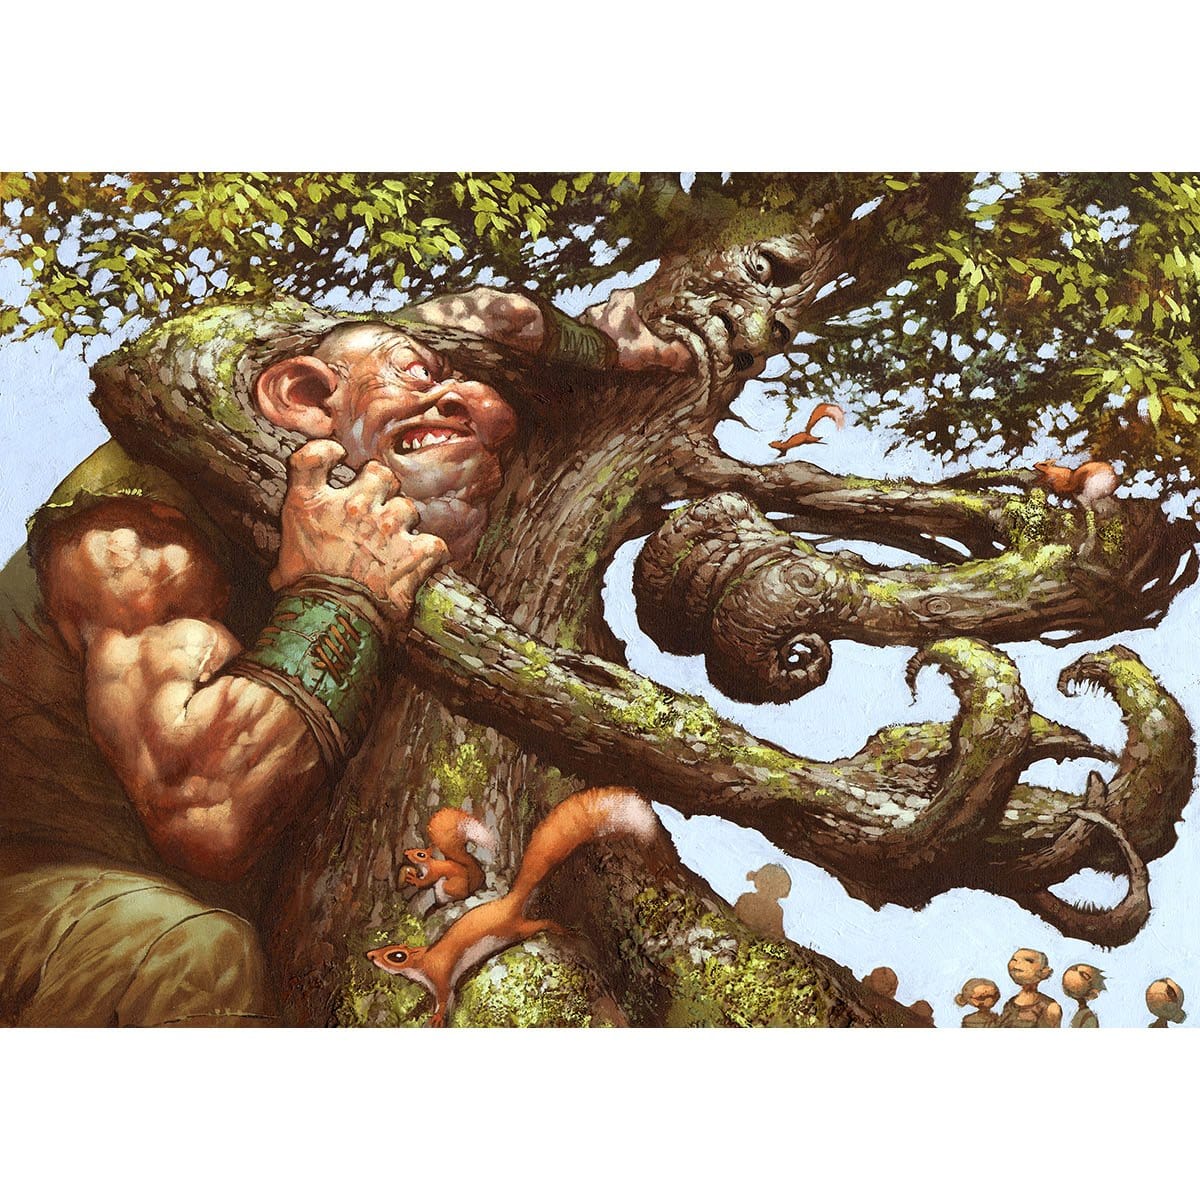 Oaken Brawler Print - Print - Original Magic Art - Accessories for Magic the Gathering and other card games